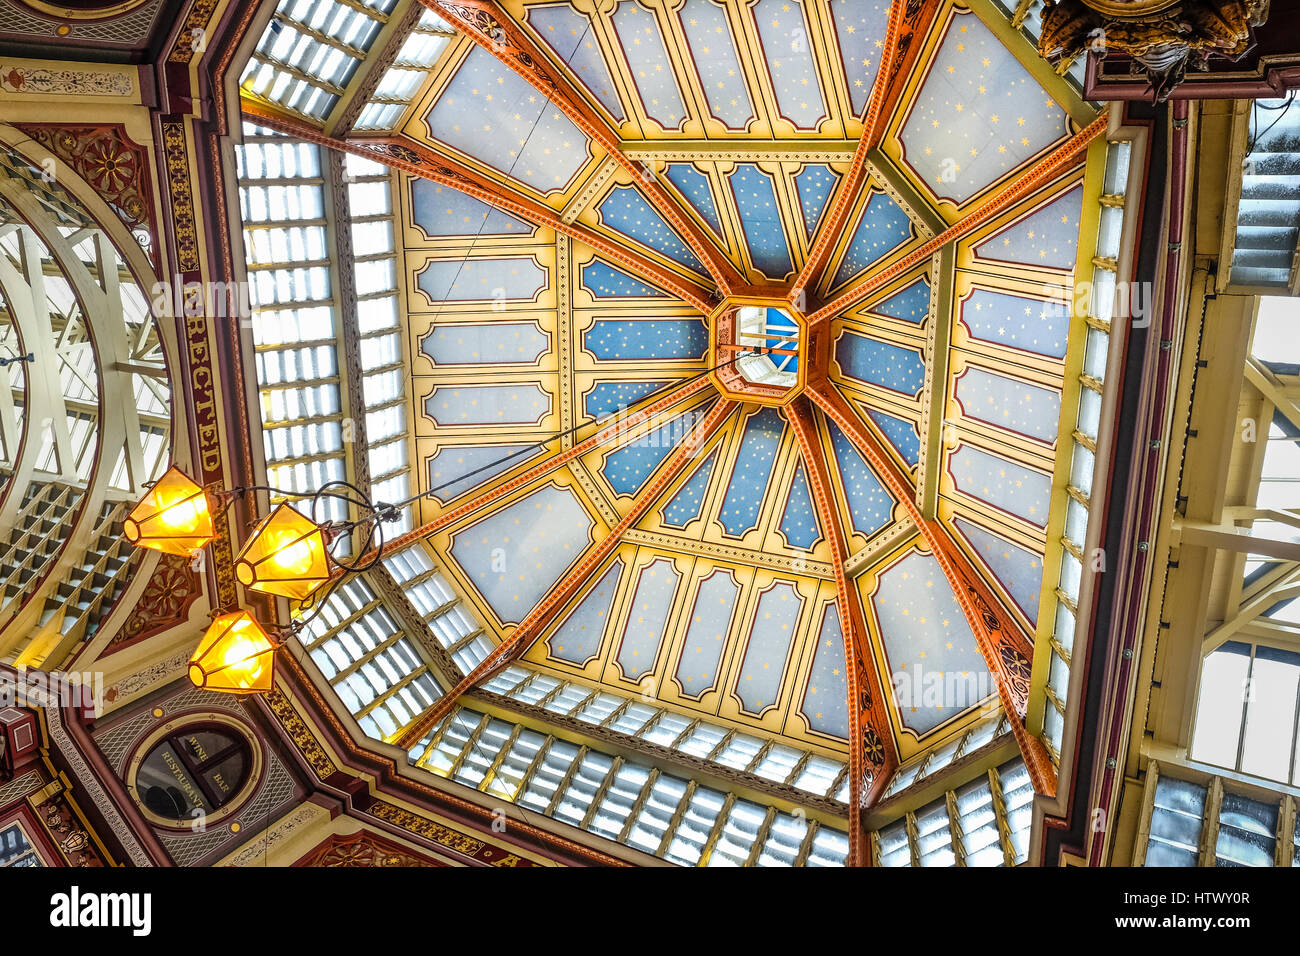 Central dome roof at Leadenhall market, victorian covered market, London. Stock Photo